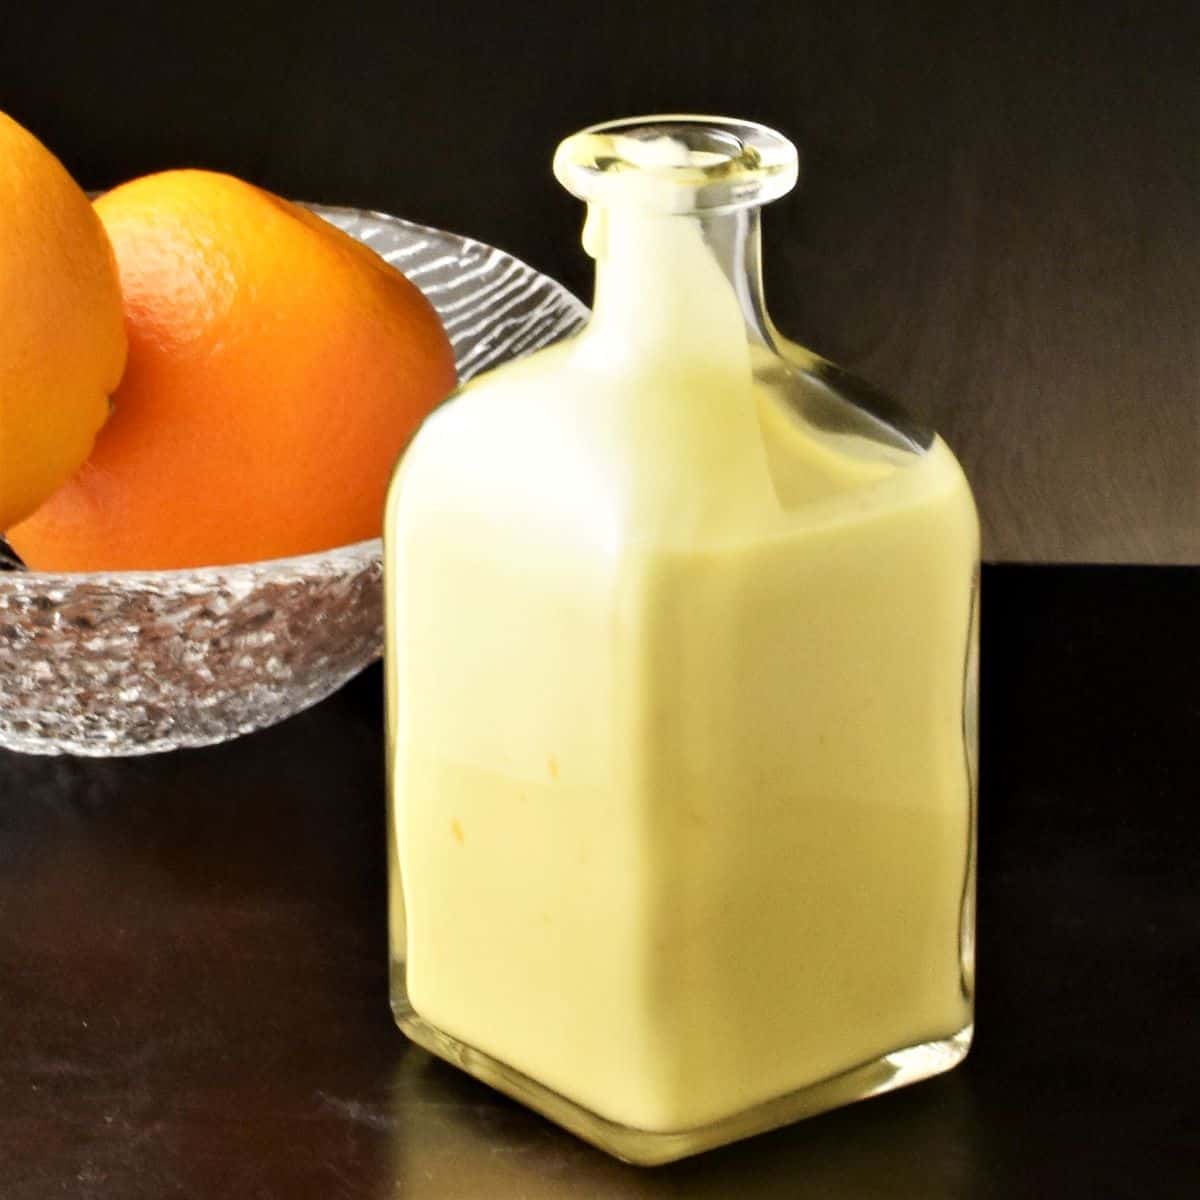 Side view of creamy orange salad dressing in bottle and oranges in background.